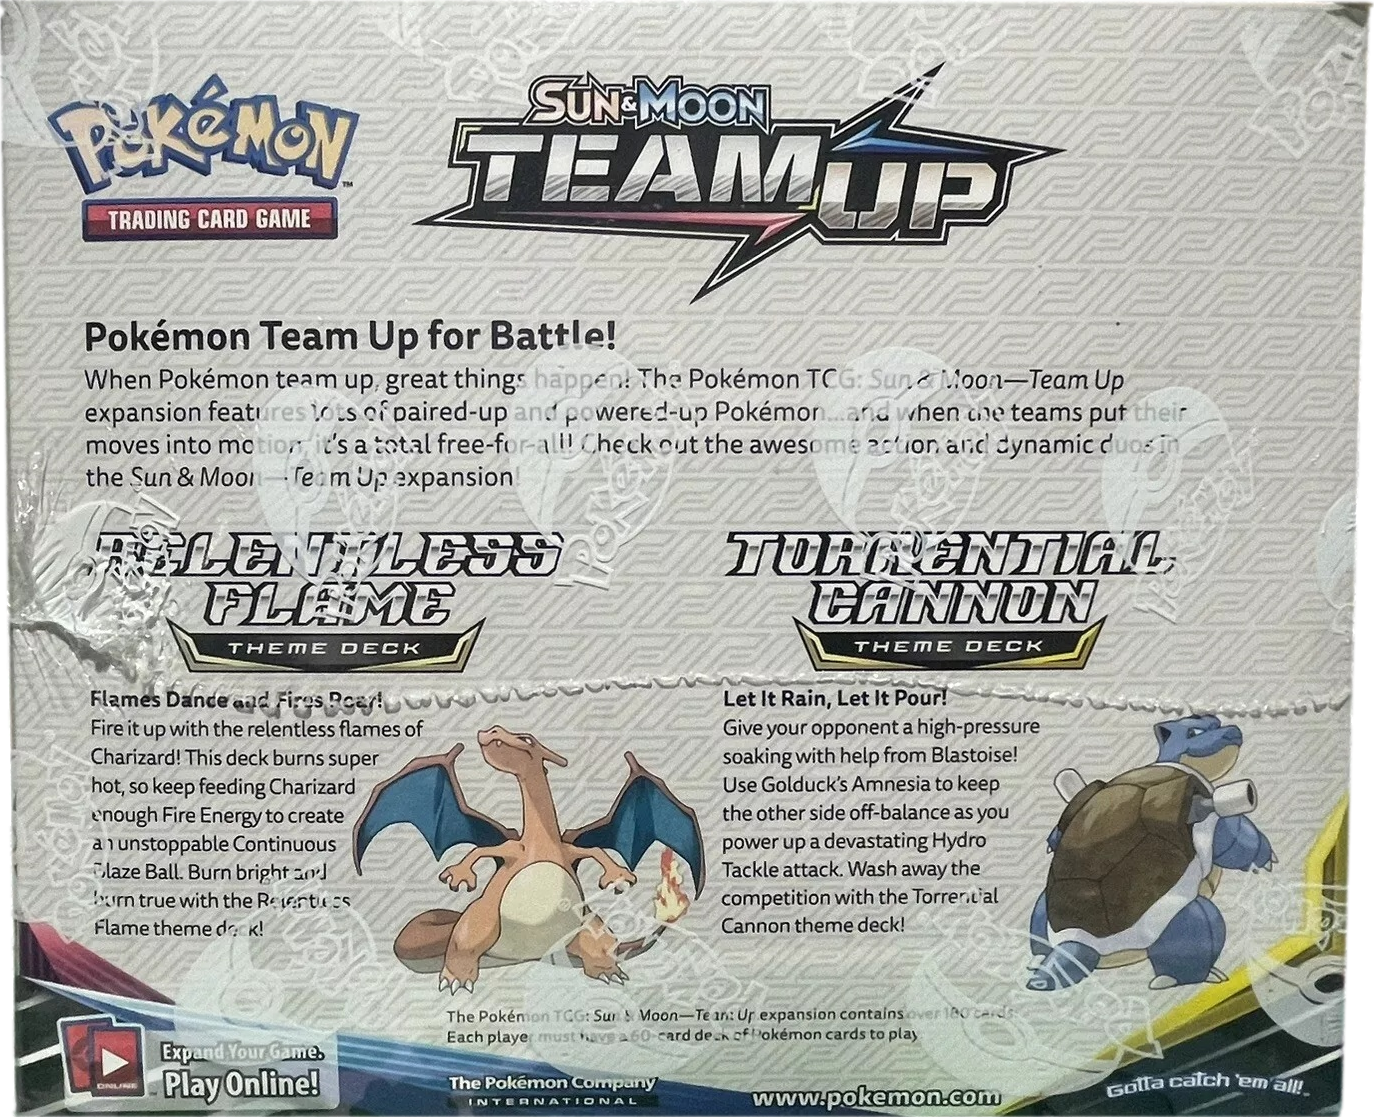 2019 POKEMON SM TEAM UP THEME DECK CASE SEALED *CONTAINS 4 RELENTLESS FLAME & 4 TORRENTIAL CANNON DECKS GENERIC IMAGE*